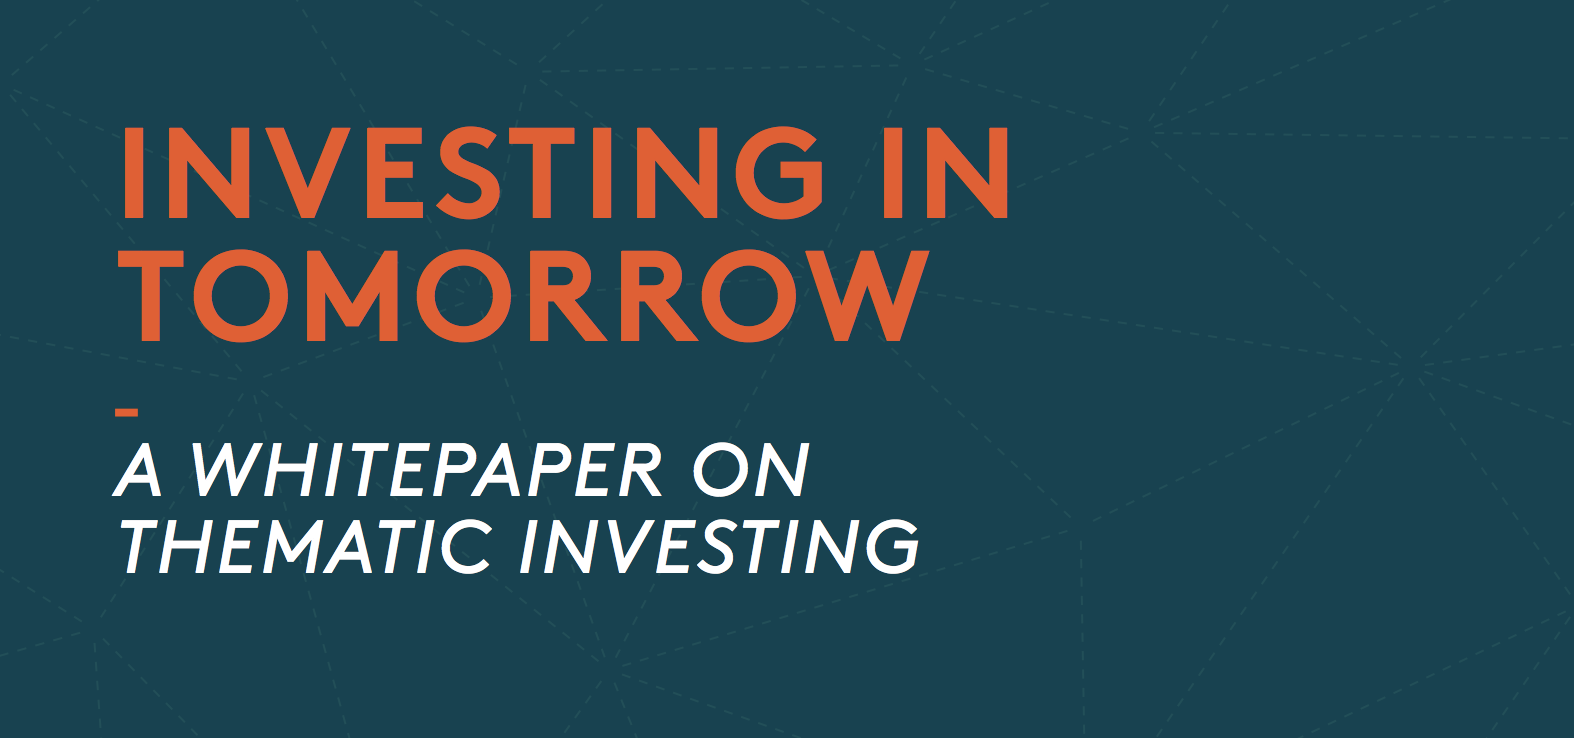 Global X Investing in Tomorrow Thematic Investing